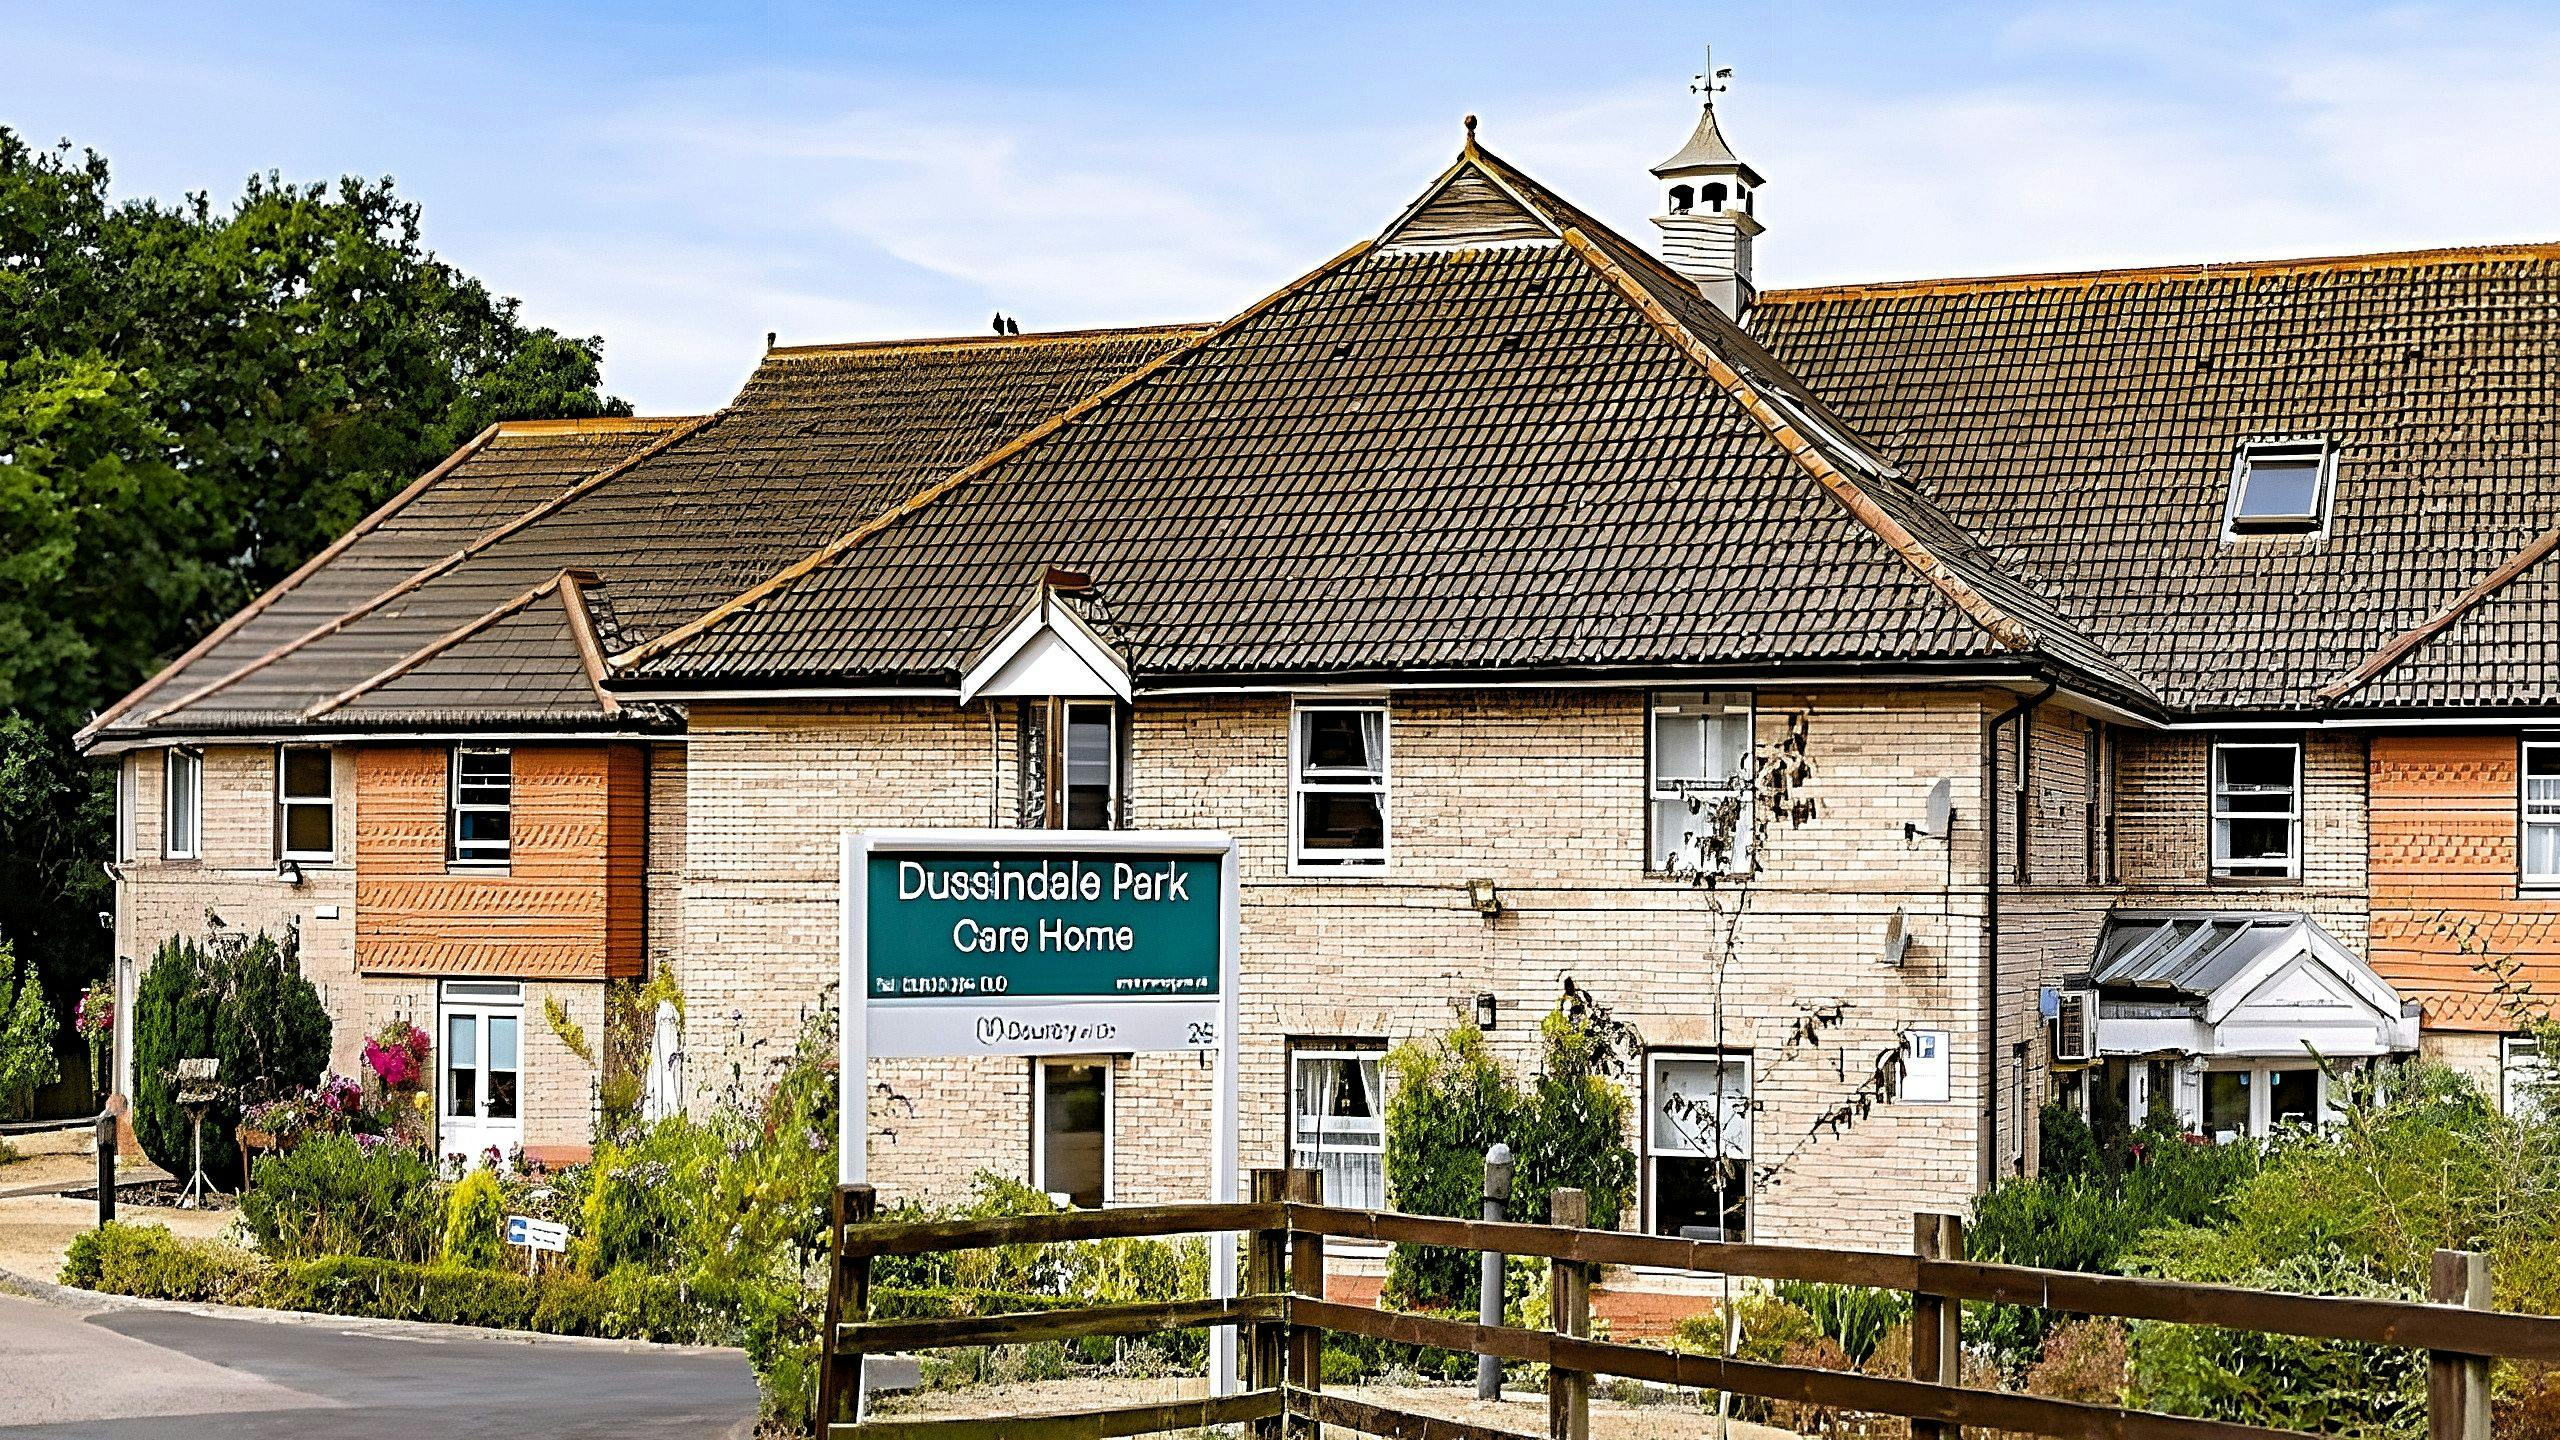 Countrywide - Dussindale Park care home 3